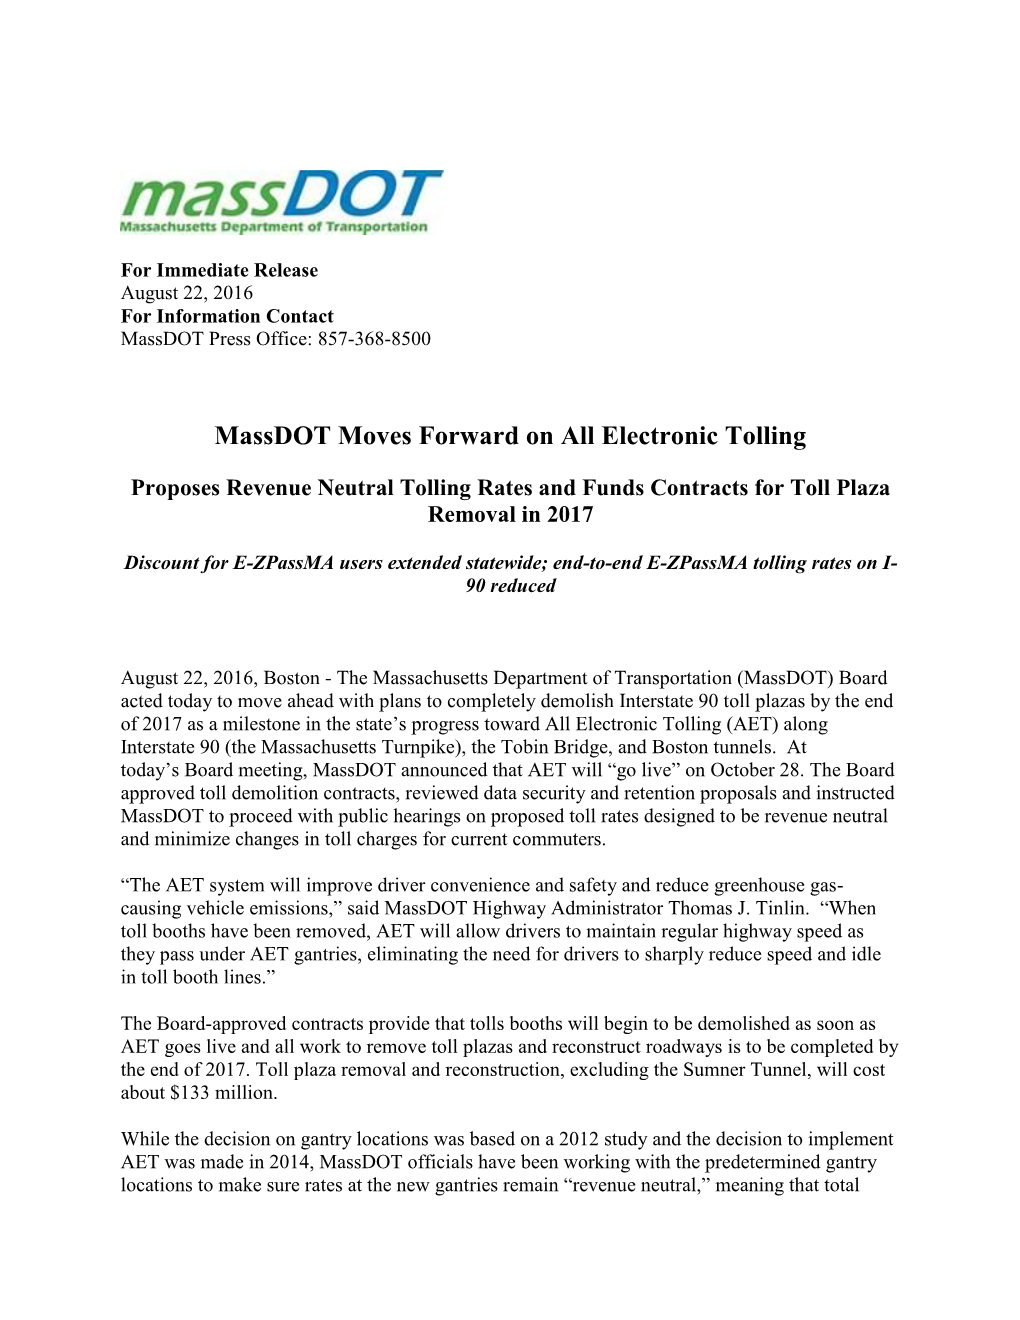 Massdot Moves Forward on All Electronic Tolling